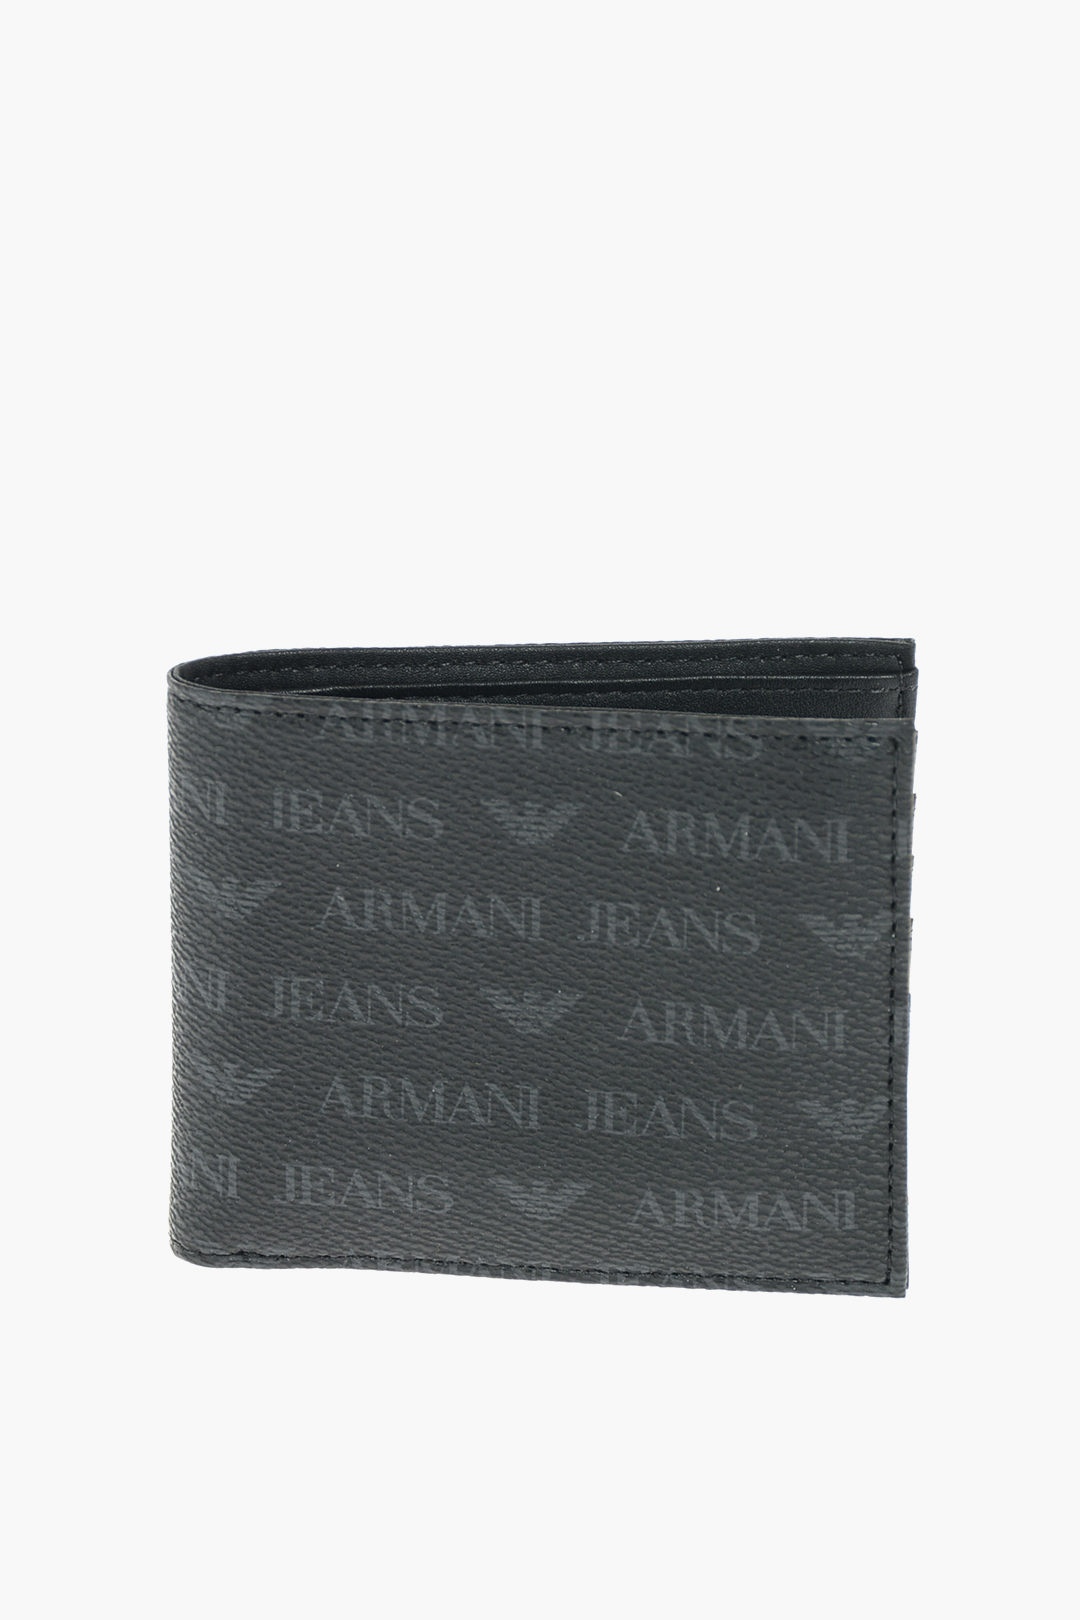 Armani Jeans Large Bags & Handbags for Women for sale | eBay